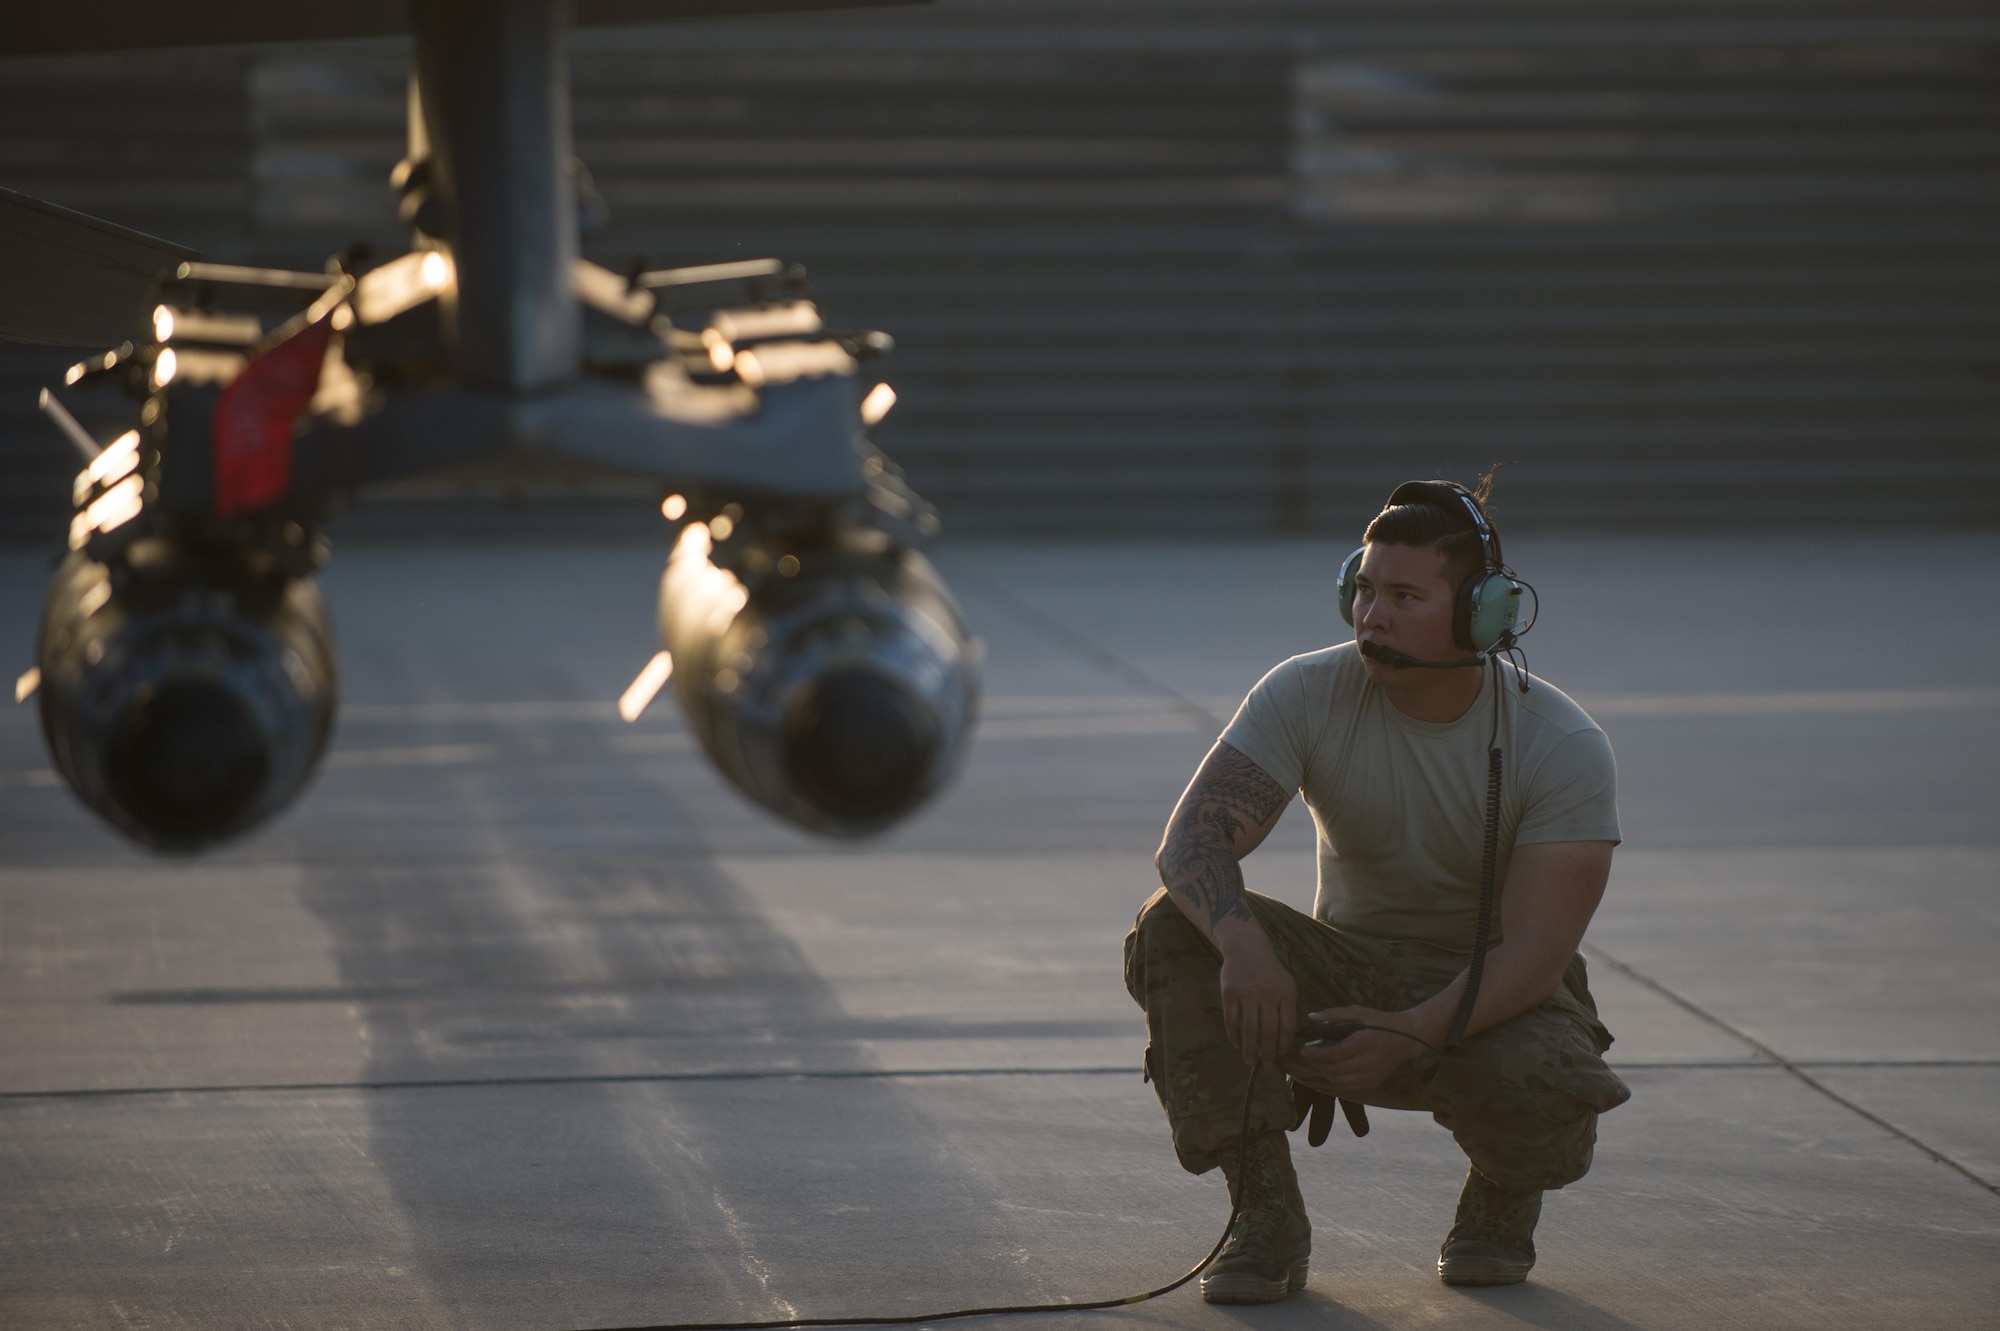 U.S. Air Force Staff Sgt. William Harris, 455th Expeditionary Maintenance Squadron crew chief, looks on during an F-16 Fighting Falcon aircraft preflight inspection at Bagram Airfield, Afghanistan, June 8, 2015. The 455th EAMXS ensure Fighting Falcons on Bagram are prepared for flight and return them to a mission-ready state once they land.  (U.S. Air Force photo by Tech. Sgt. Joseph Swafford/Released)